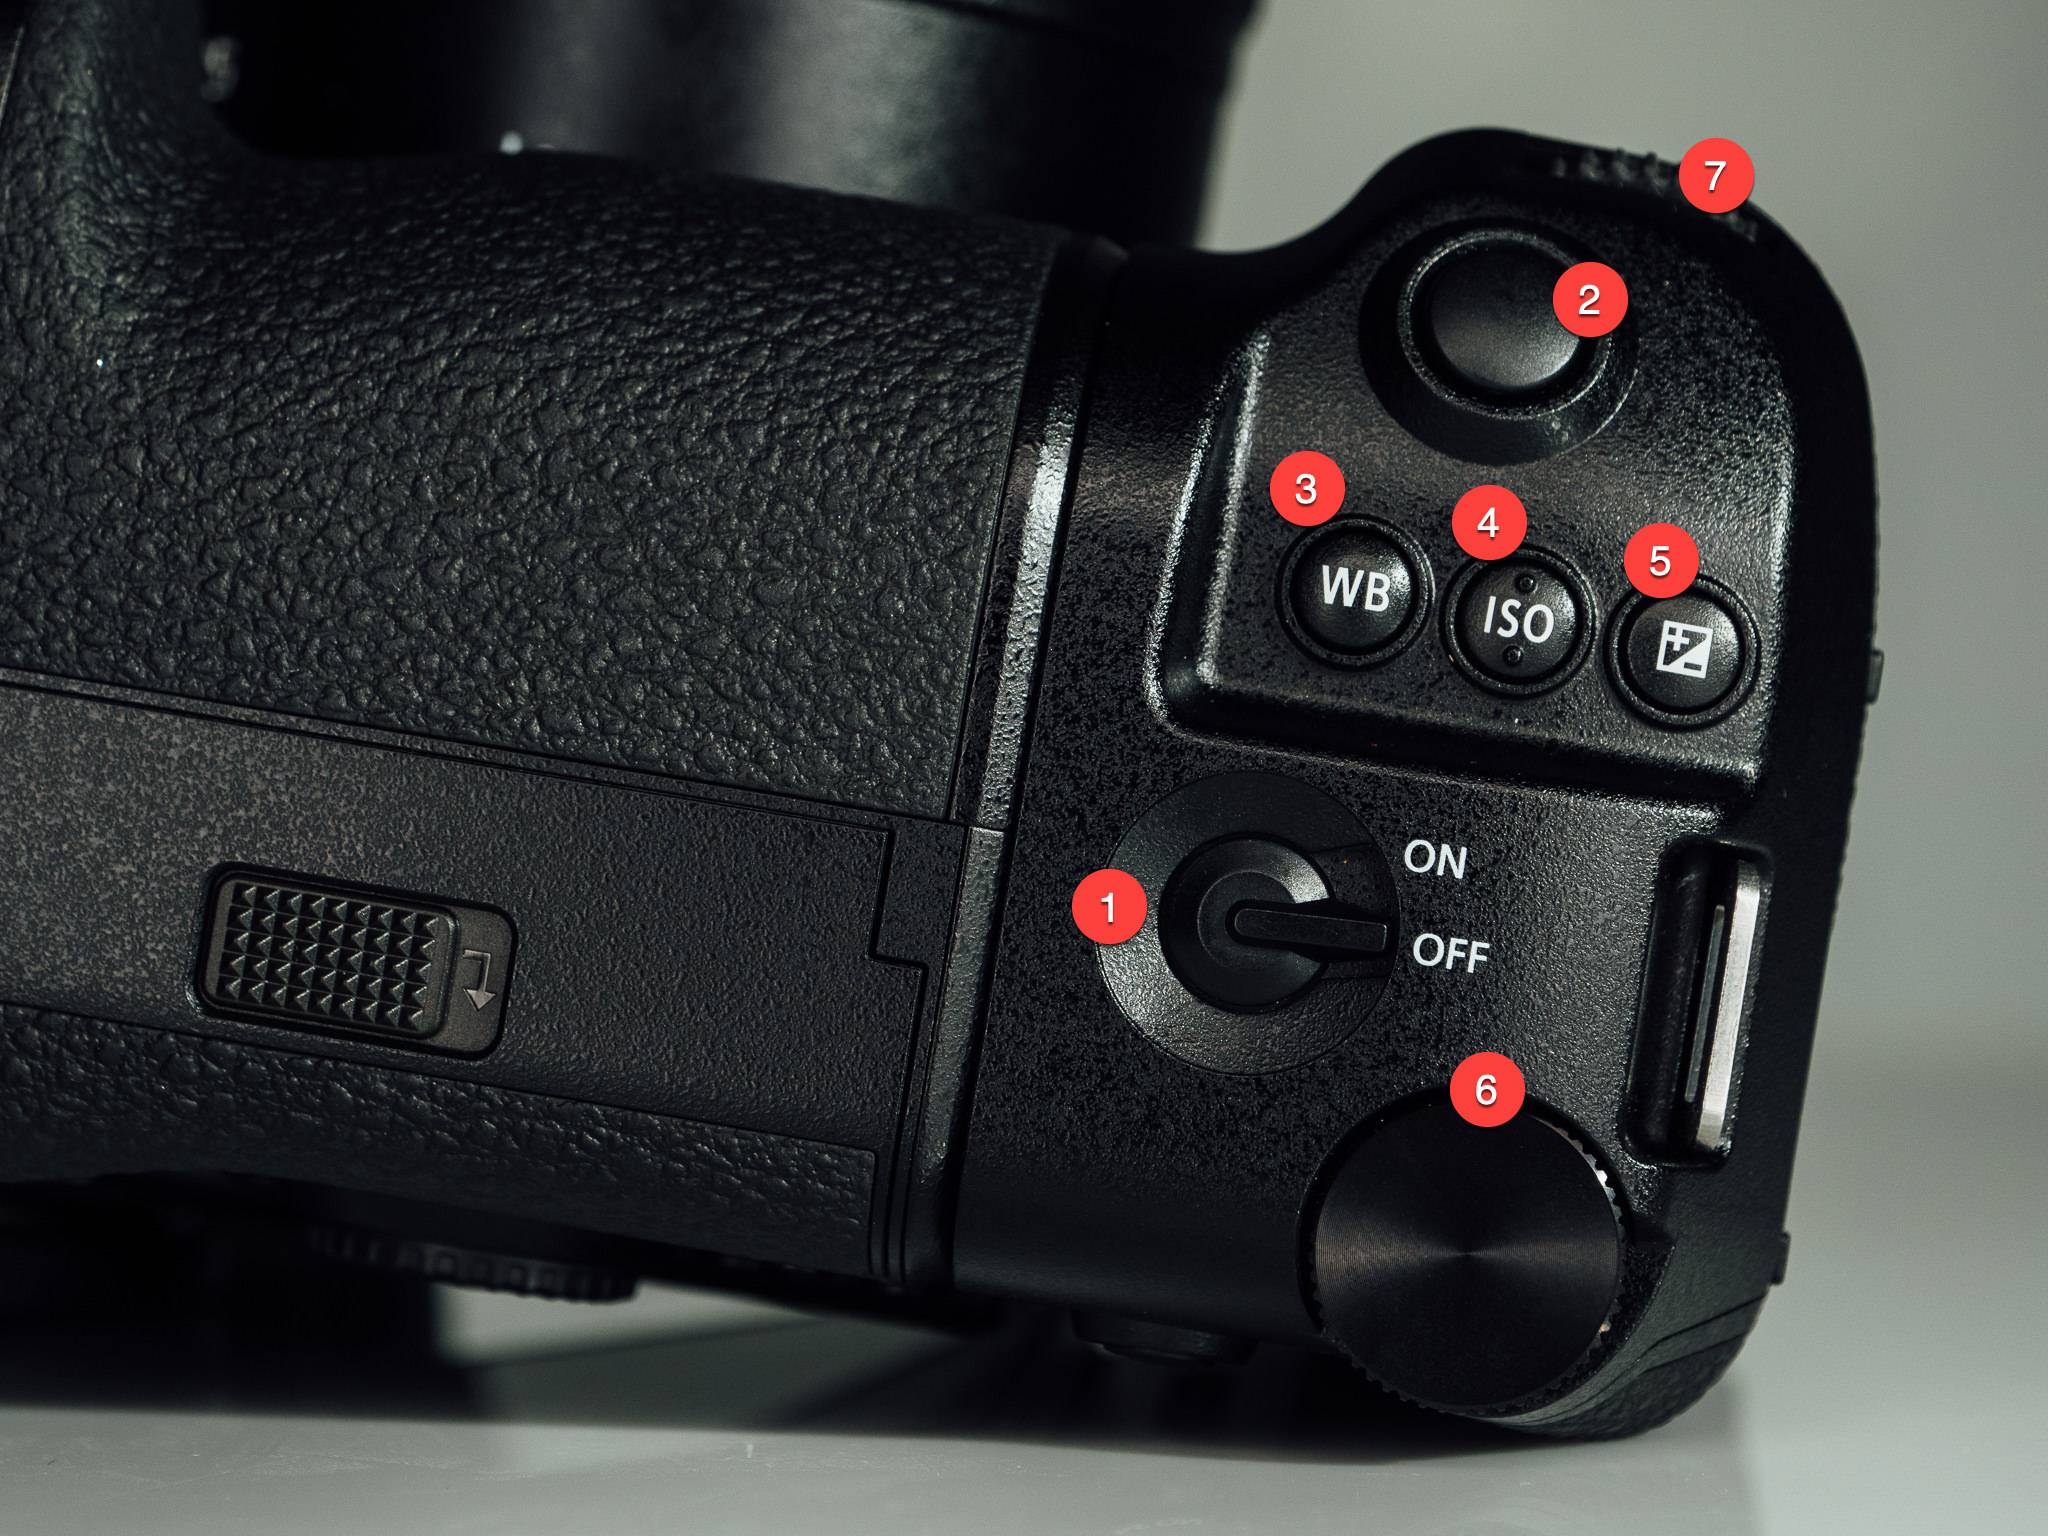 The button layout on the LUMIX BGS1